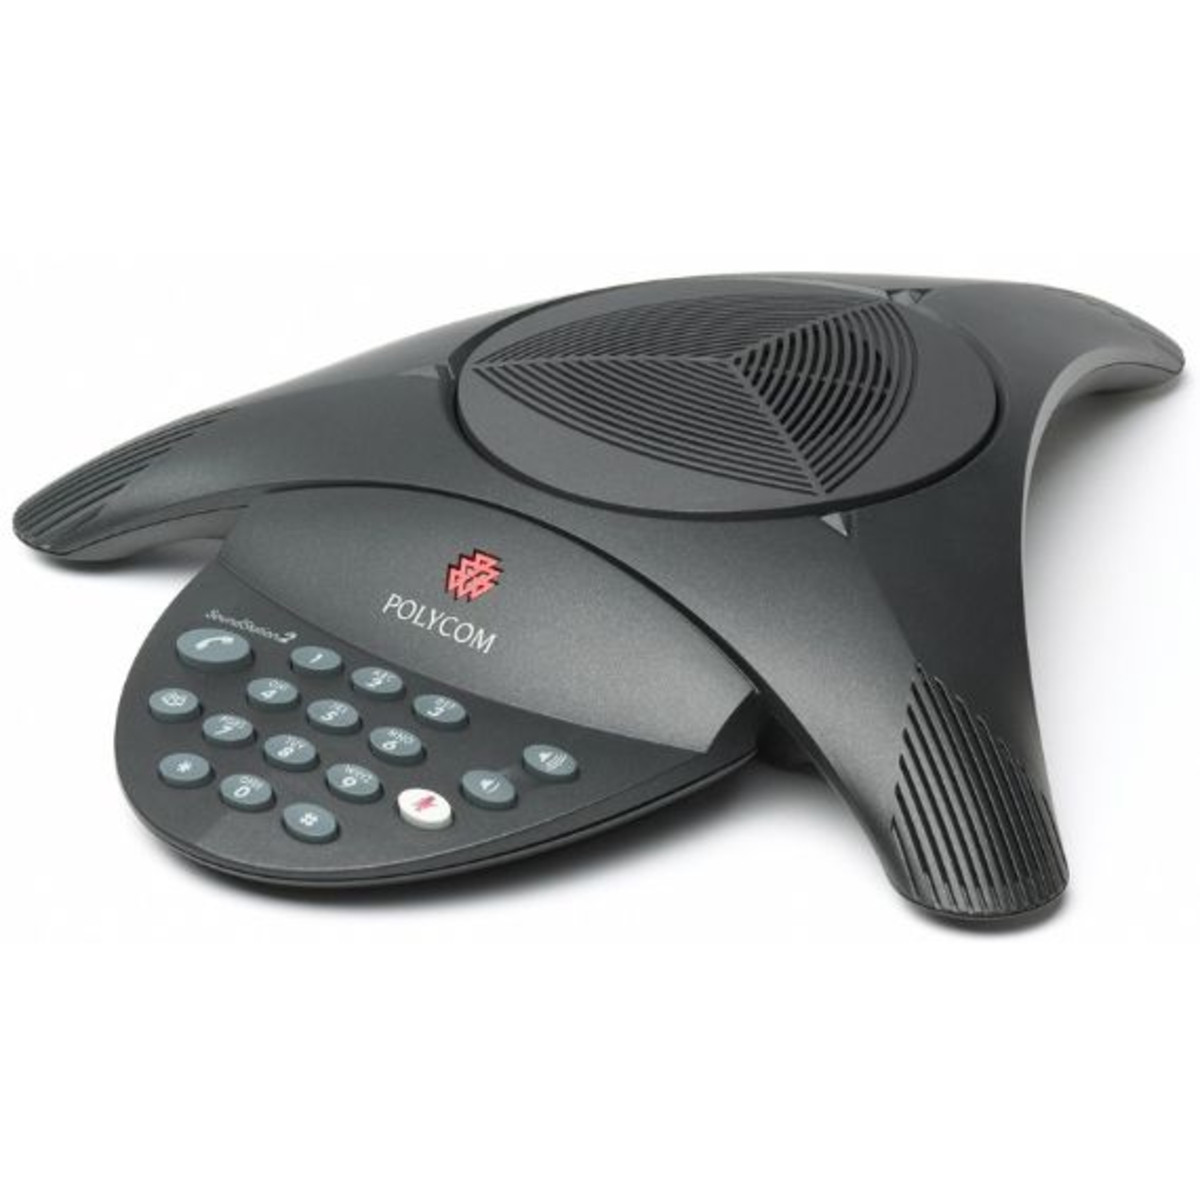 Polycom SoundStation 2 Analog Conference Phone Non-Expandable without Display (p/n- 2200-16000-036)